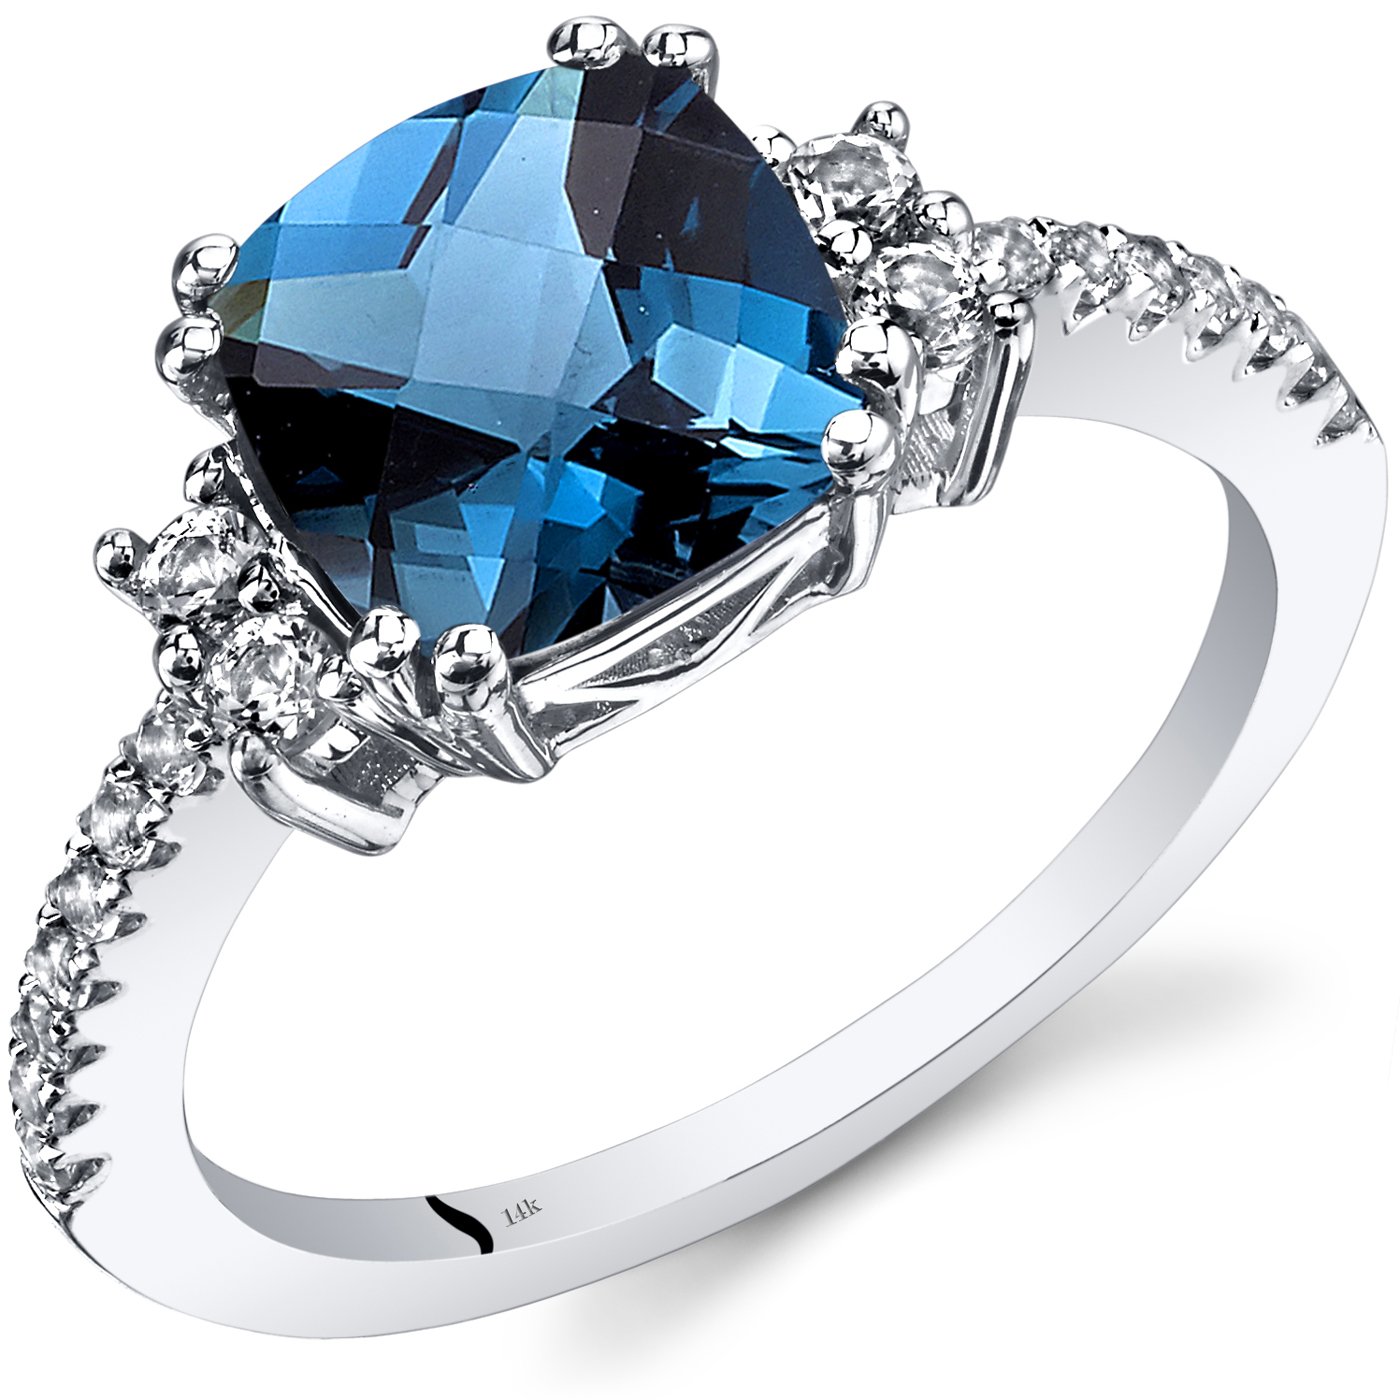 Peora London Blue Topaz Ring for Women 14K White Gold with White Topaz, Natural Gemstone Birthstone, Designer 2.50 Carats Cushion Cut 8mm, Comfort Fit, Sizes 5 to 9